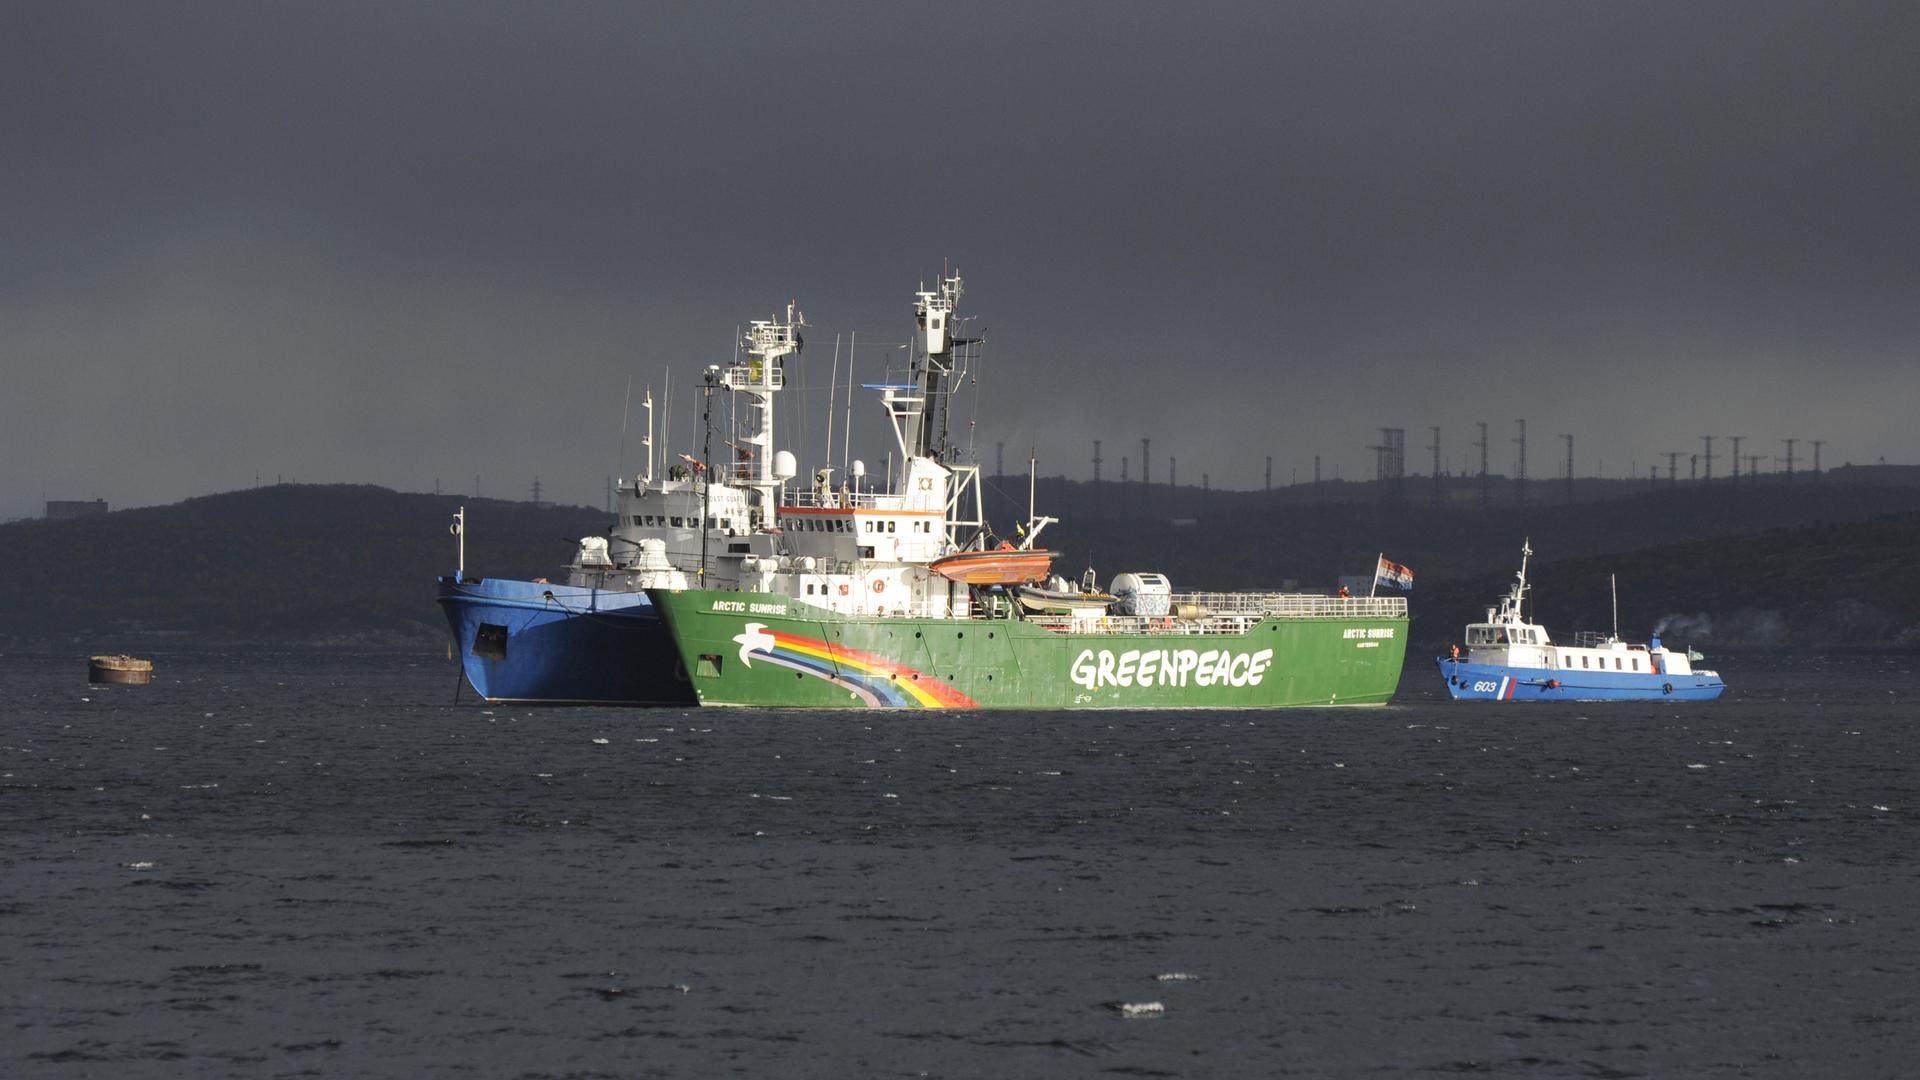 2289356 Russia. 09/24/2013 Greenpeace's ice class Arctic Sunrise detained by FSB during an action of protest at the Prirazlomnaya oil platform in the Kola Bay of the Perchora Sea. Sergey Eshenko/RIA Novosti